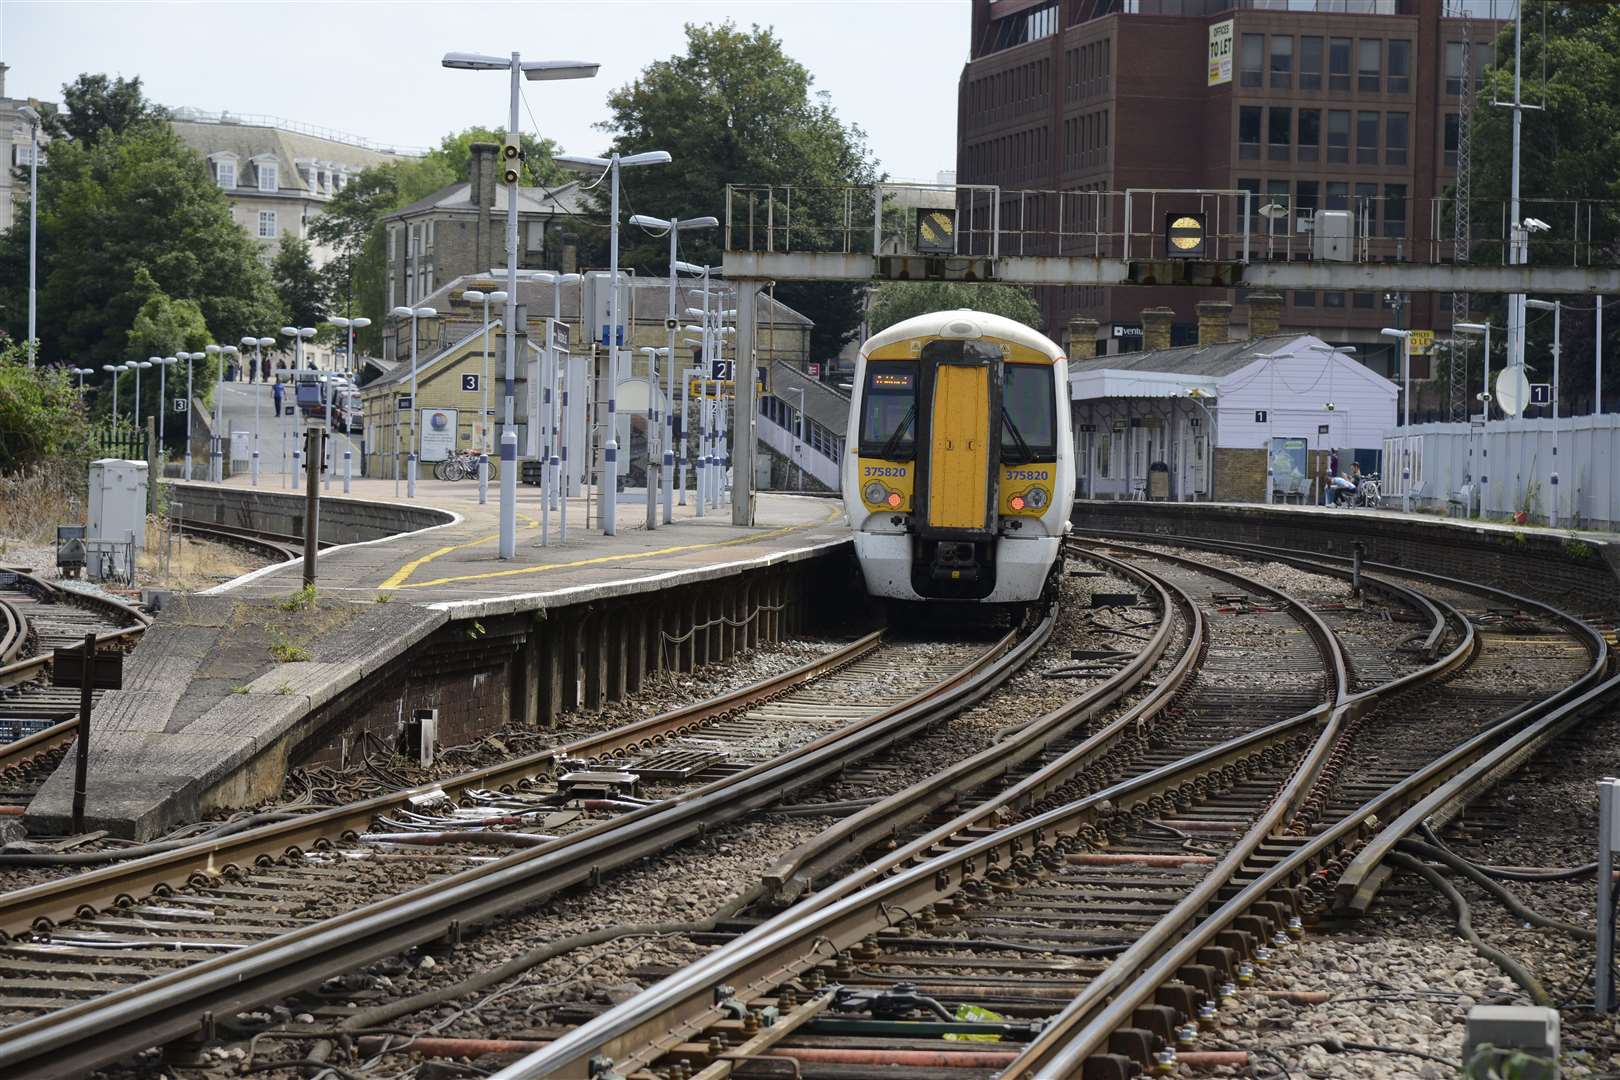 Trains at Maidstone East may be cancelled, delayed or revised